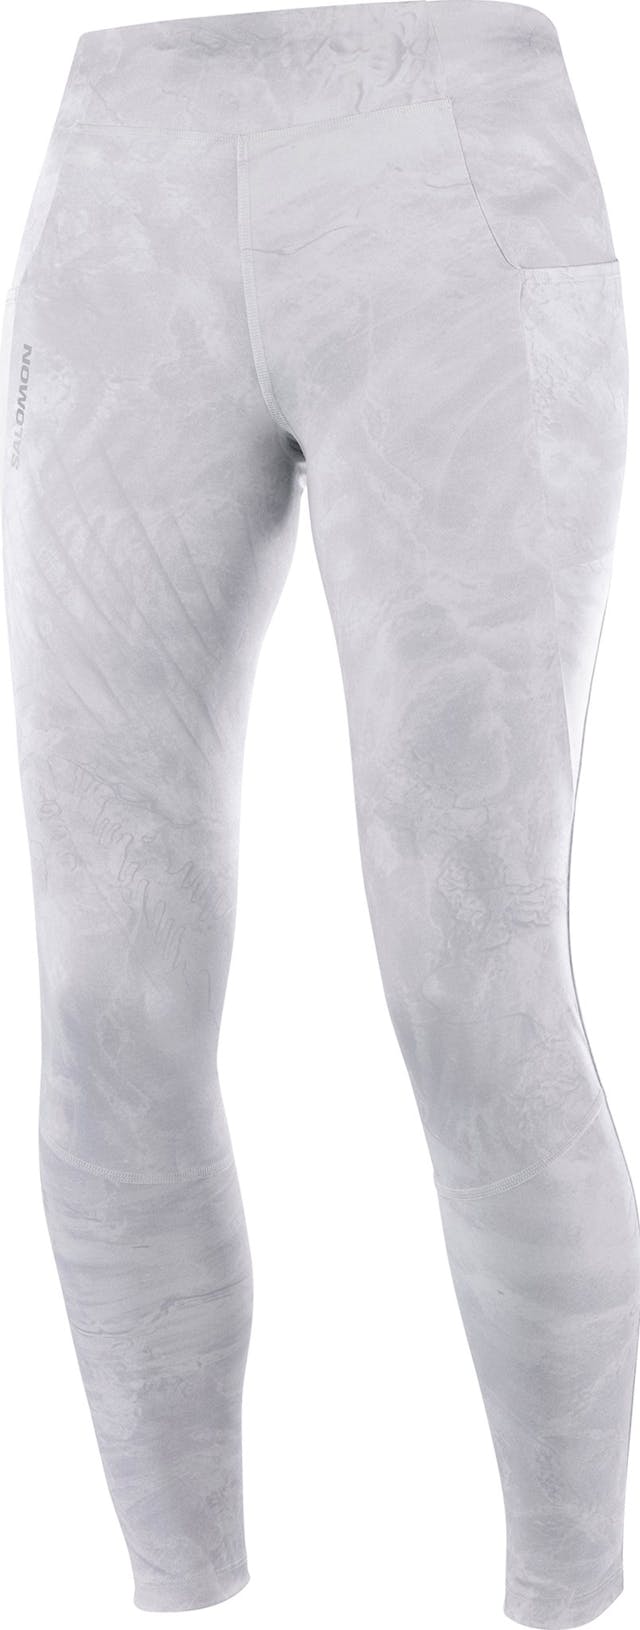 Product image for Cross Run 28 In Tights - Women's